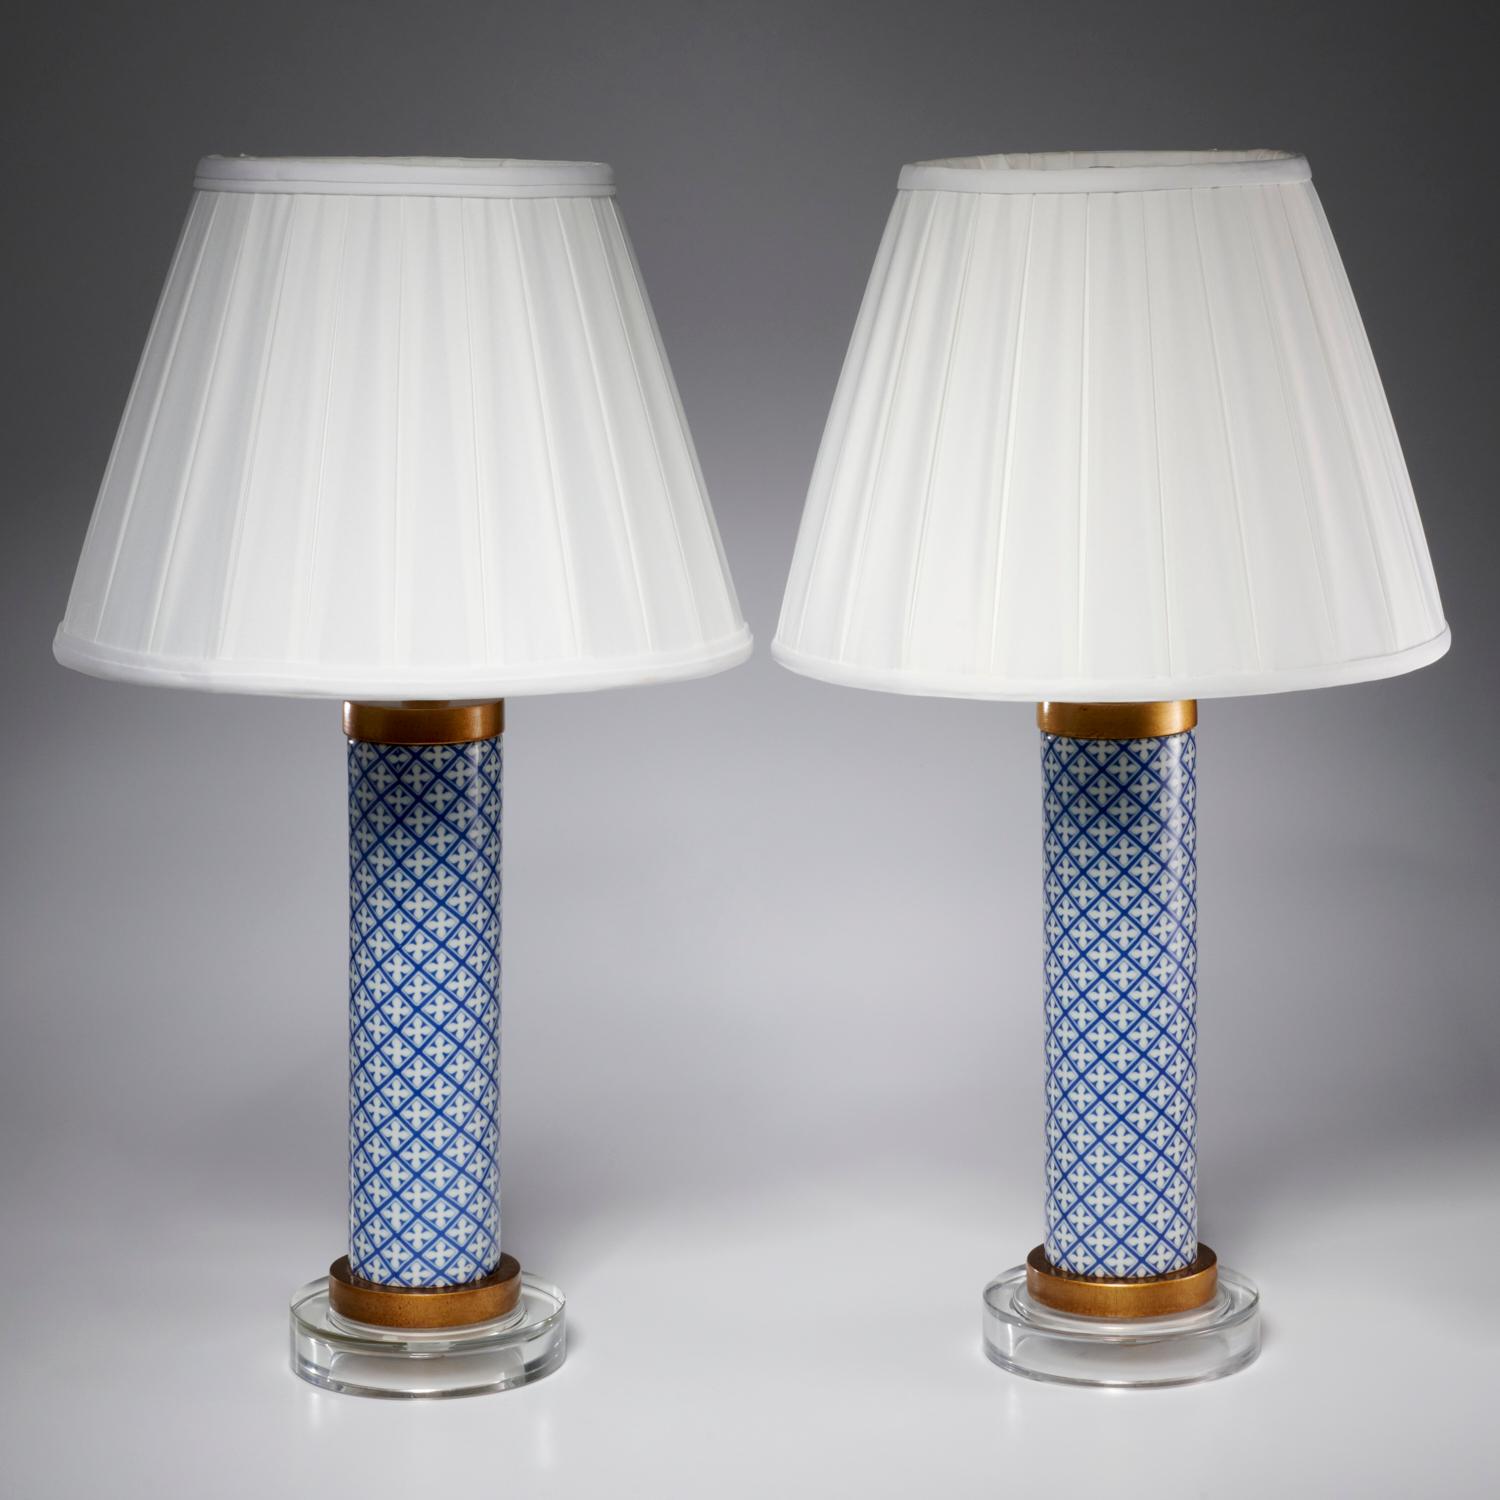 Contemporary Pair Blue and White Geometric Porcelain and Brass Cylinder Lamps with Shades